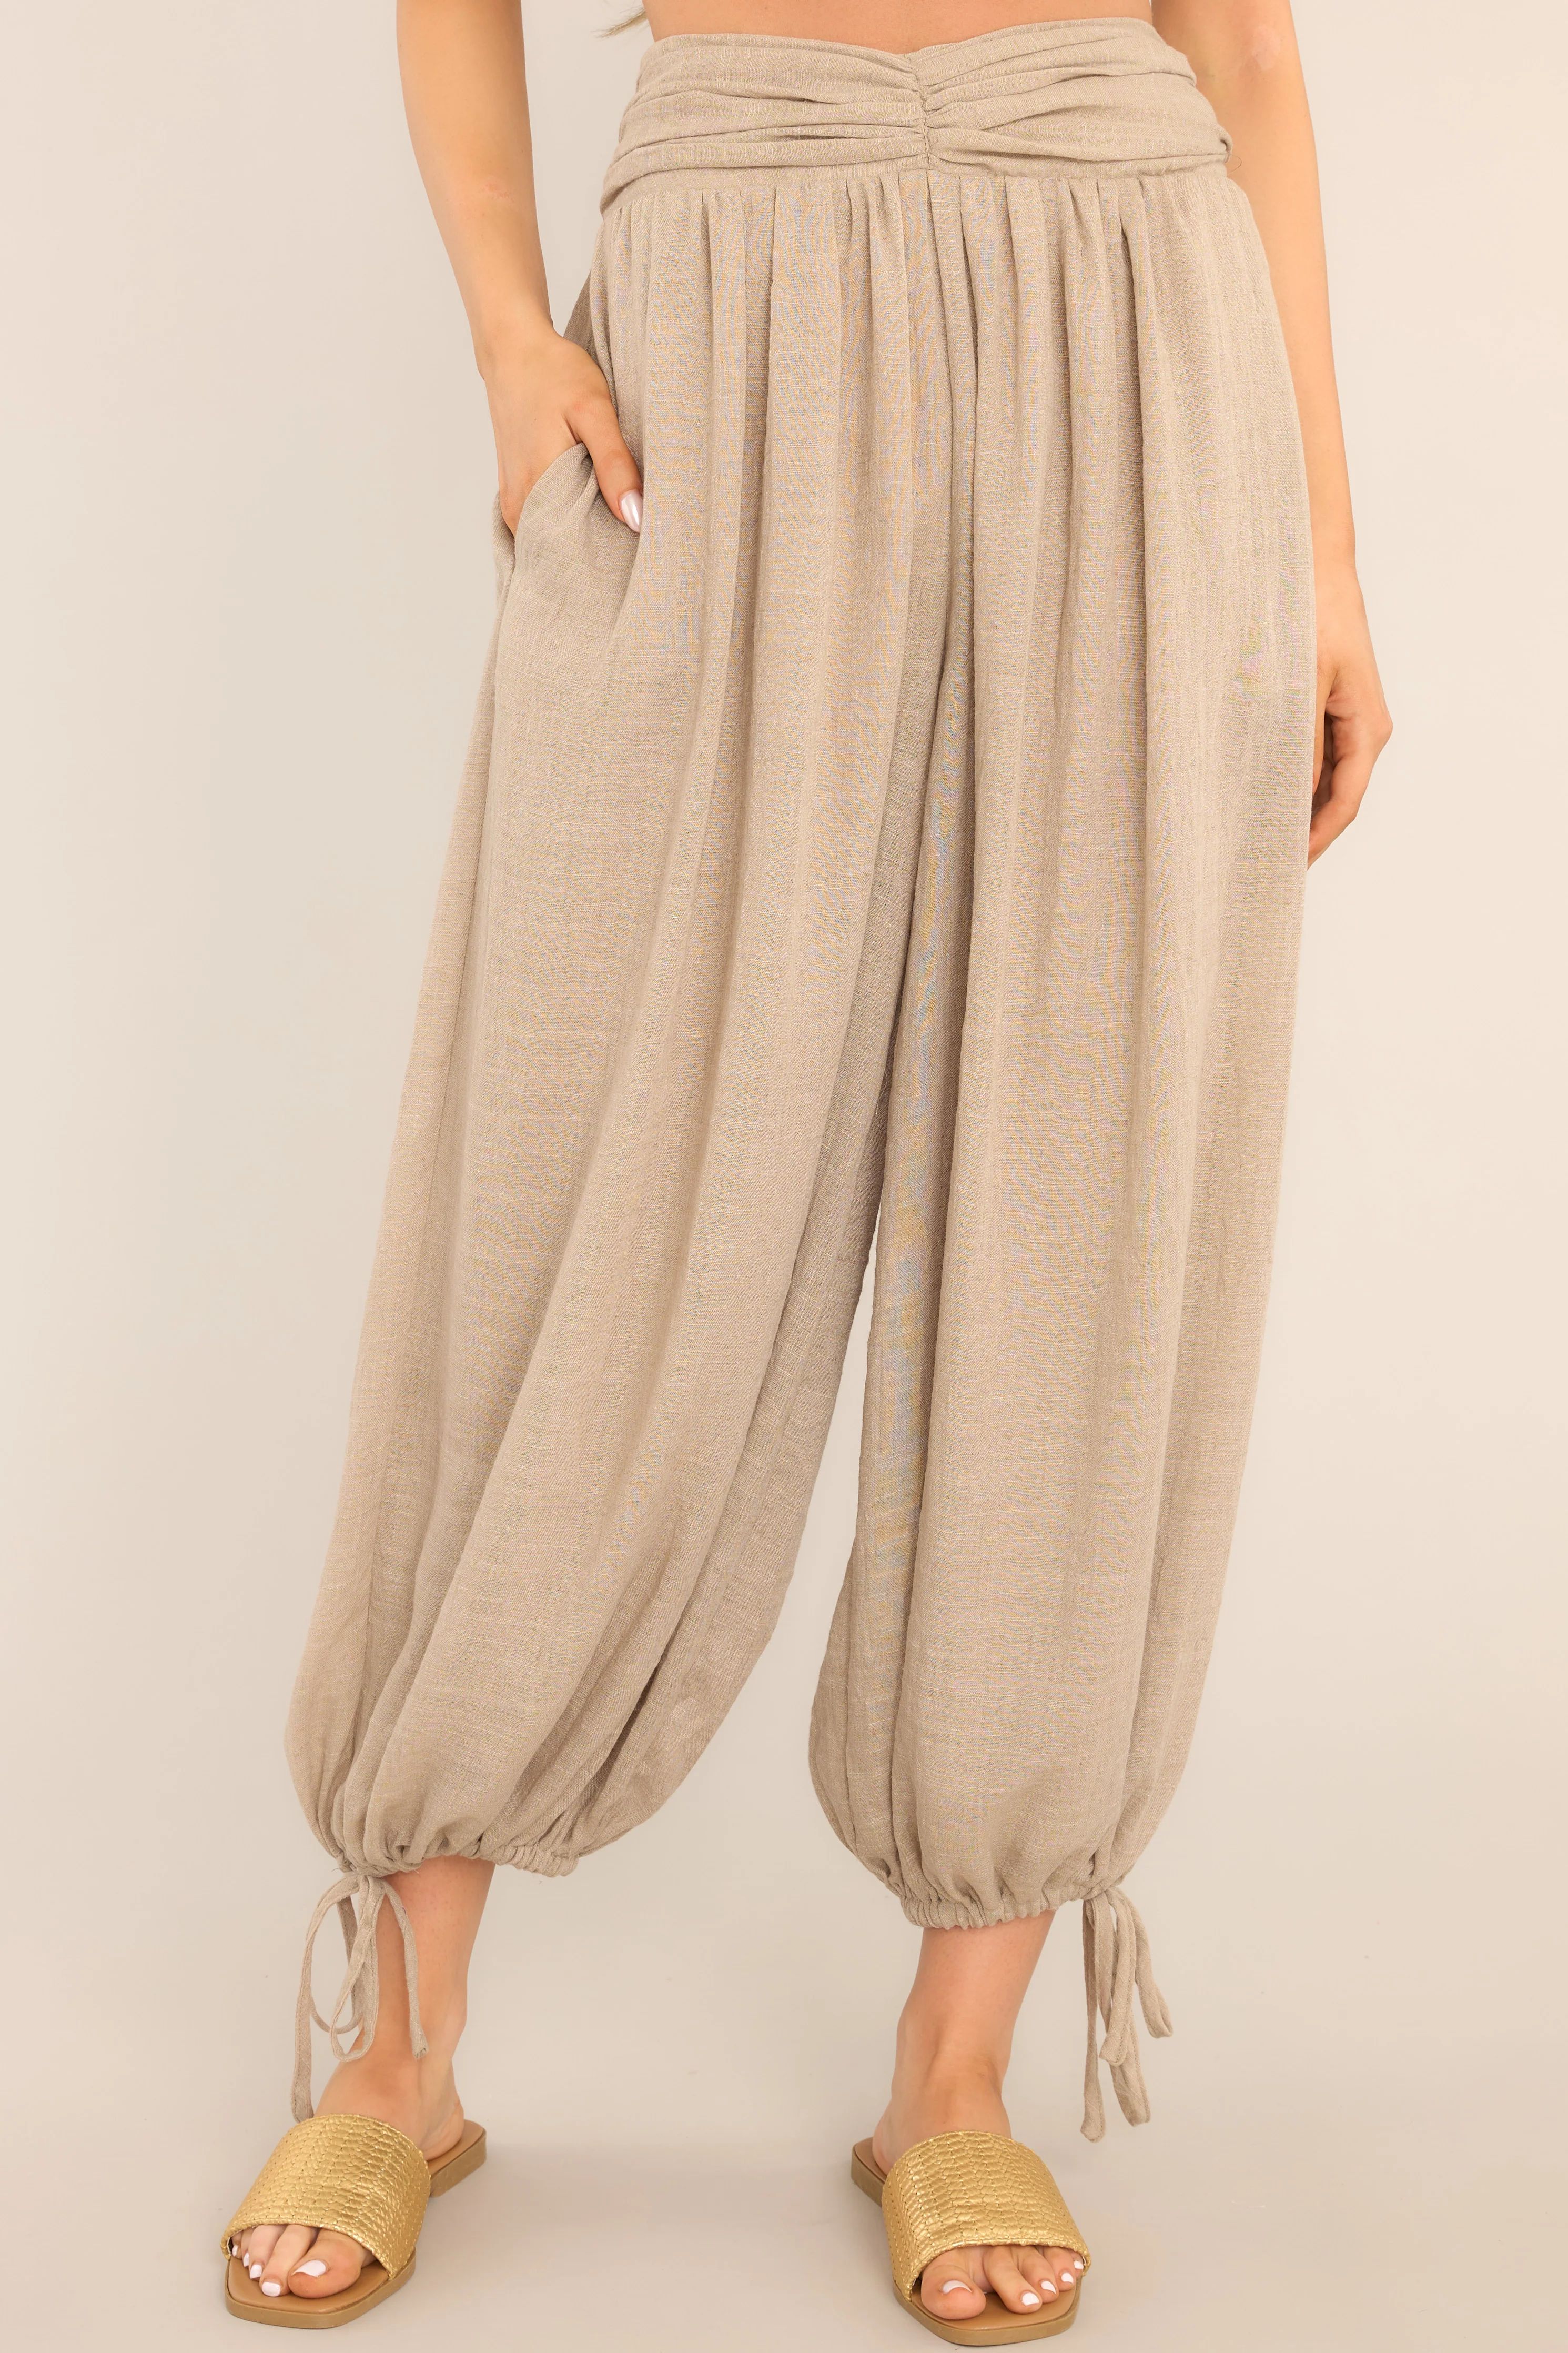 Float In The Wind Tan Pants | Red Dress 